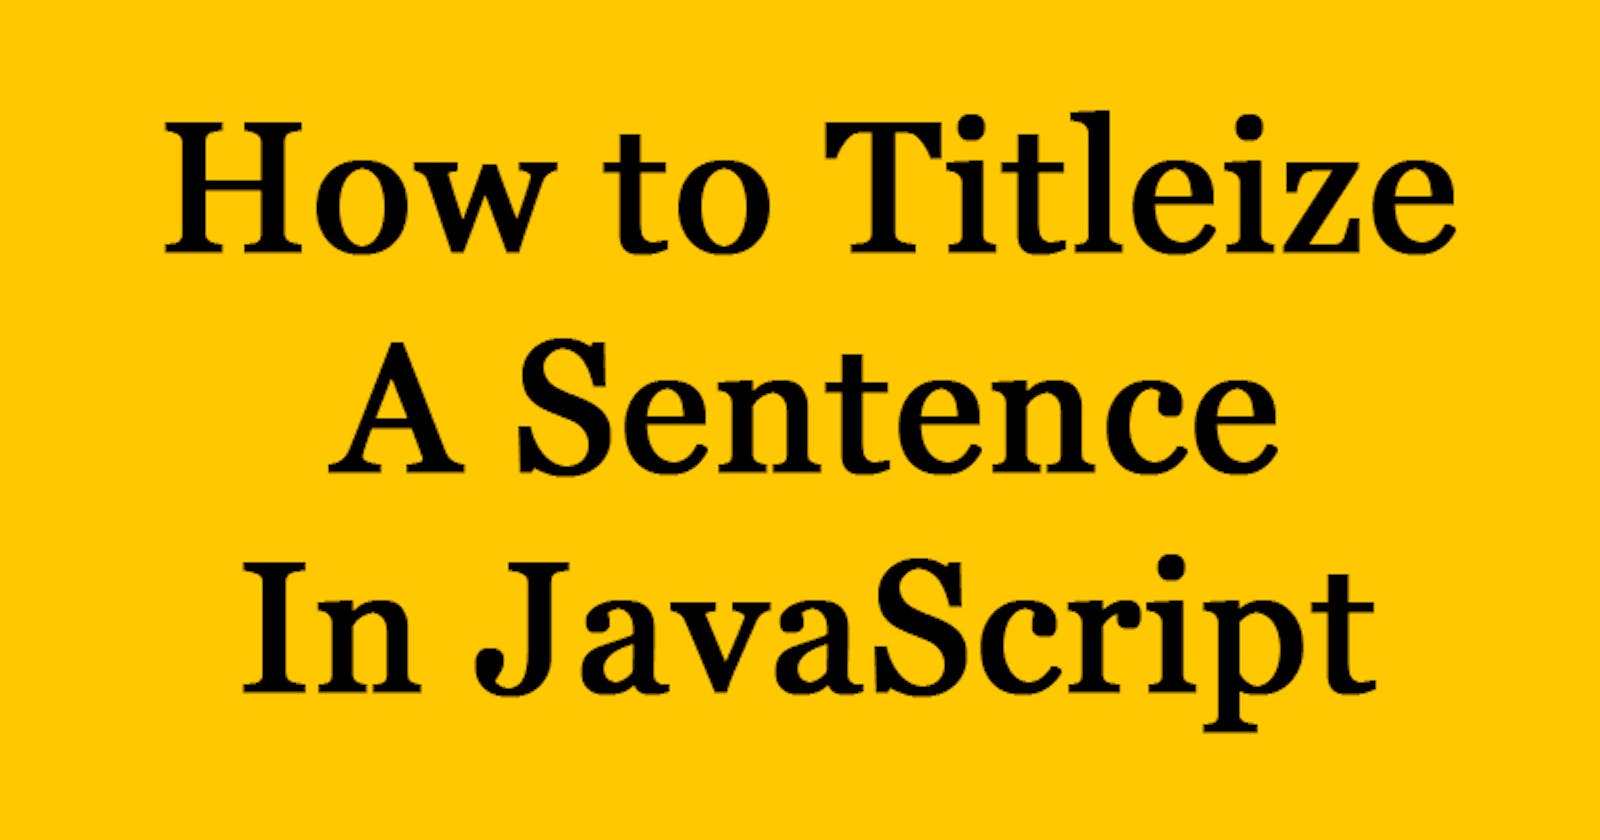 How to Titleize a Sentence in JavaScript